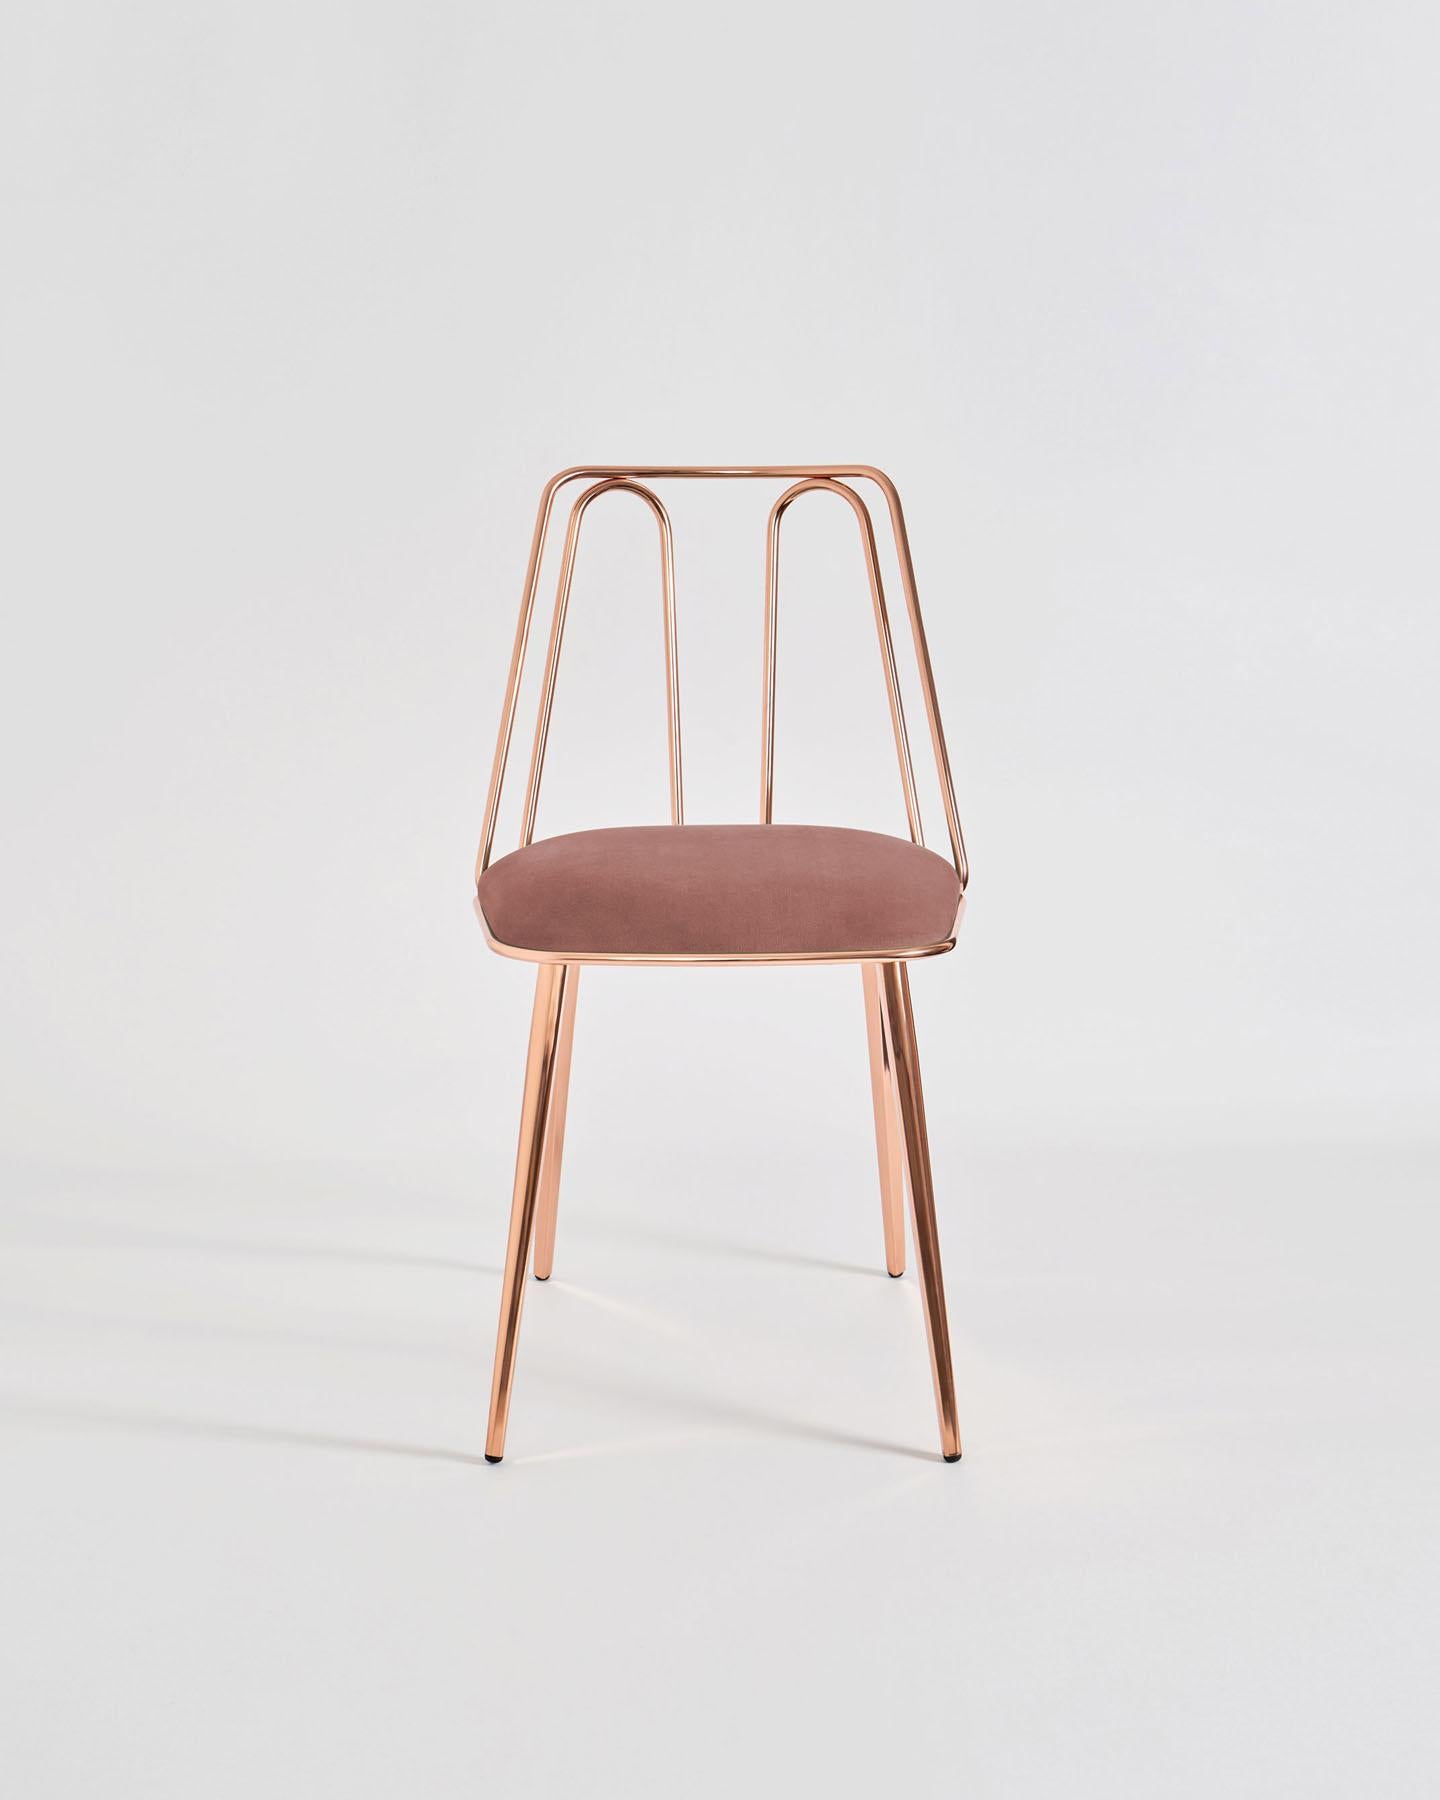 Certosina, design by Enrico Girotti, a slender metal rod outlines the ideal surface of the backrest with an alternating and sinuous movement, interacting with the seat in an embrace from which trapezoidal shaped legs develop downward.
Each piece of